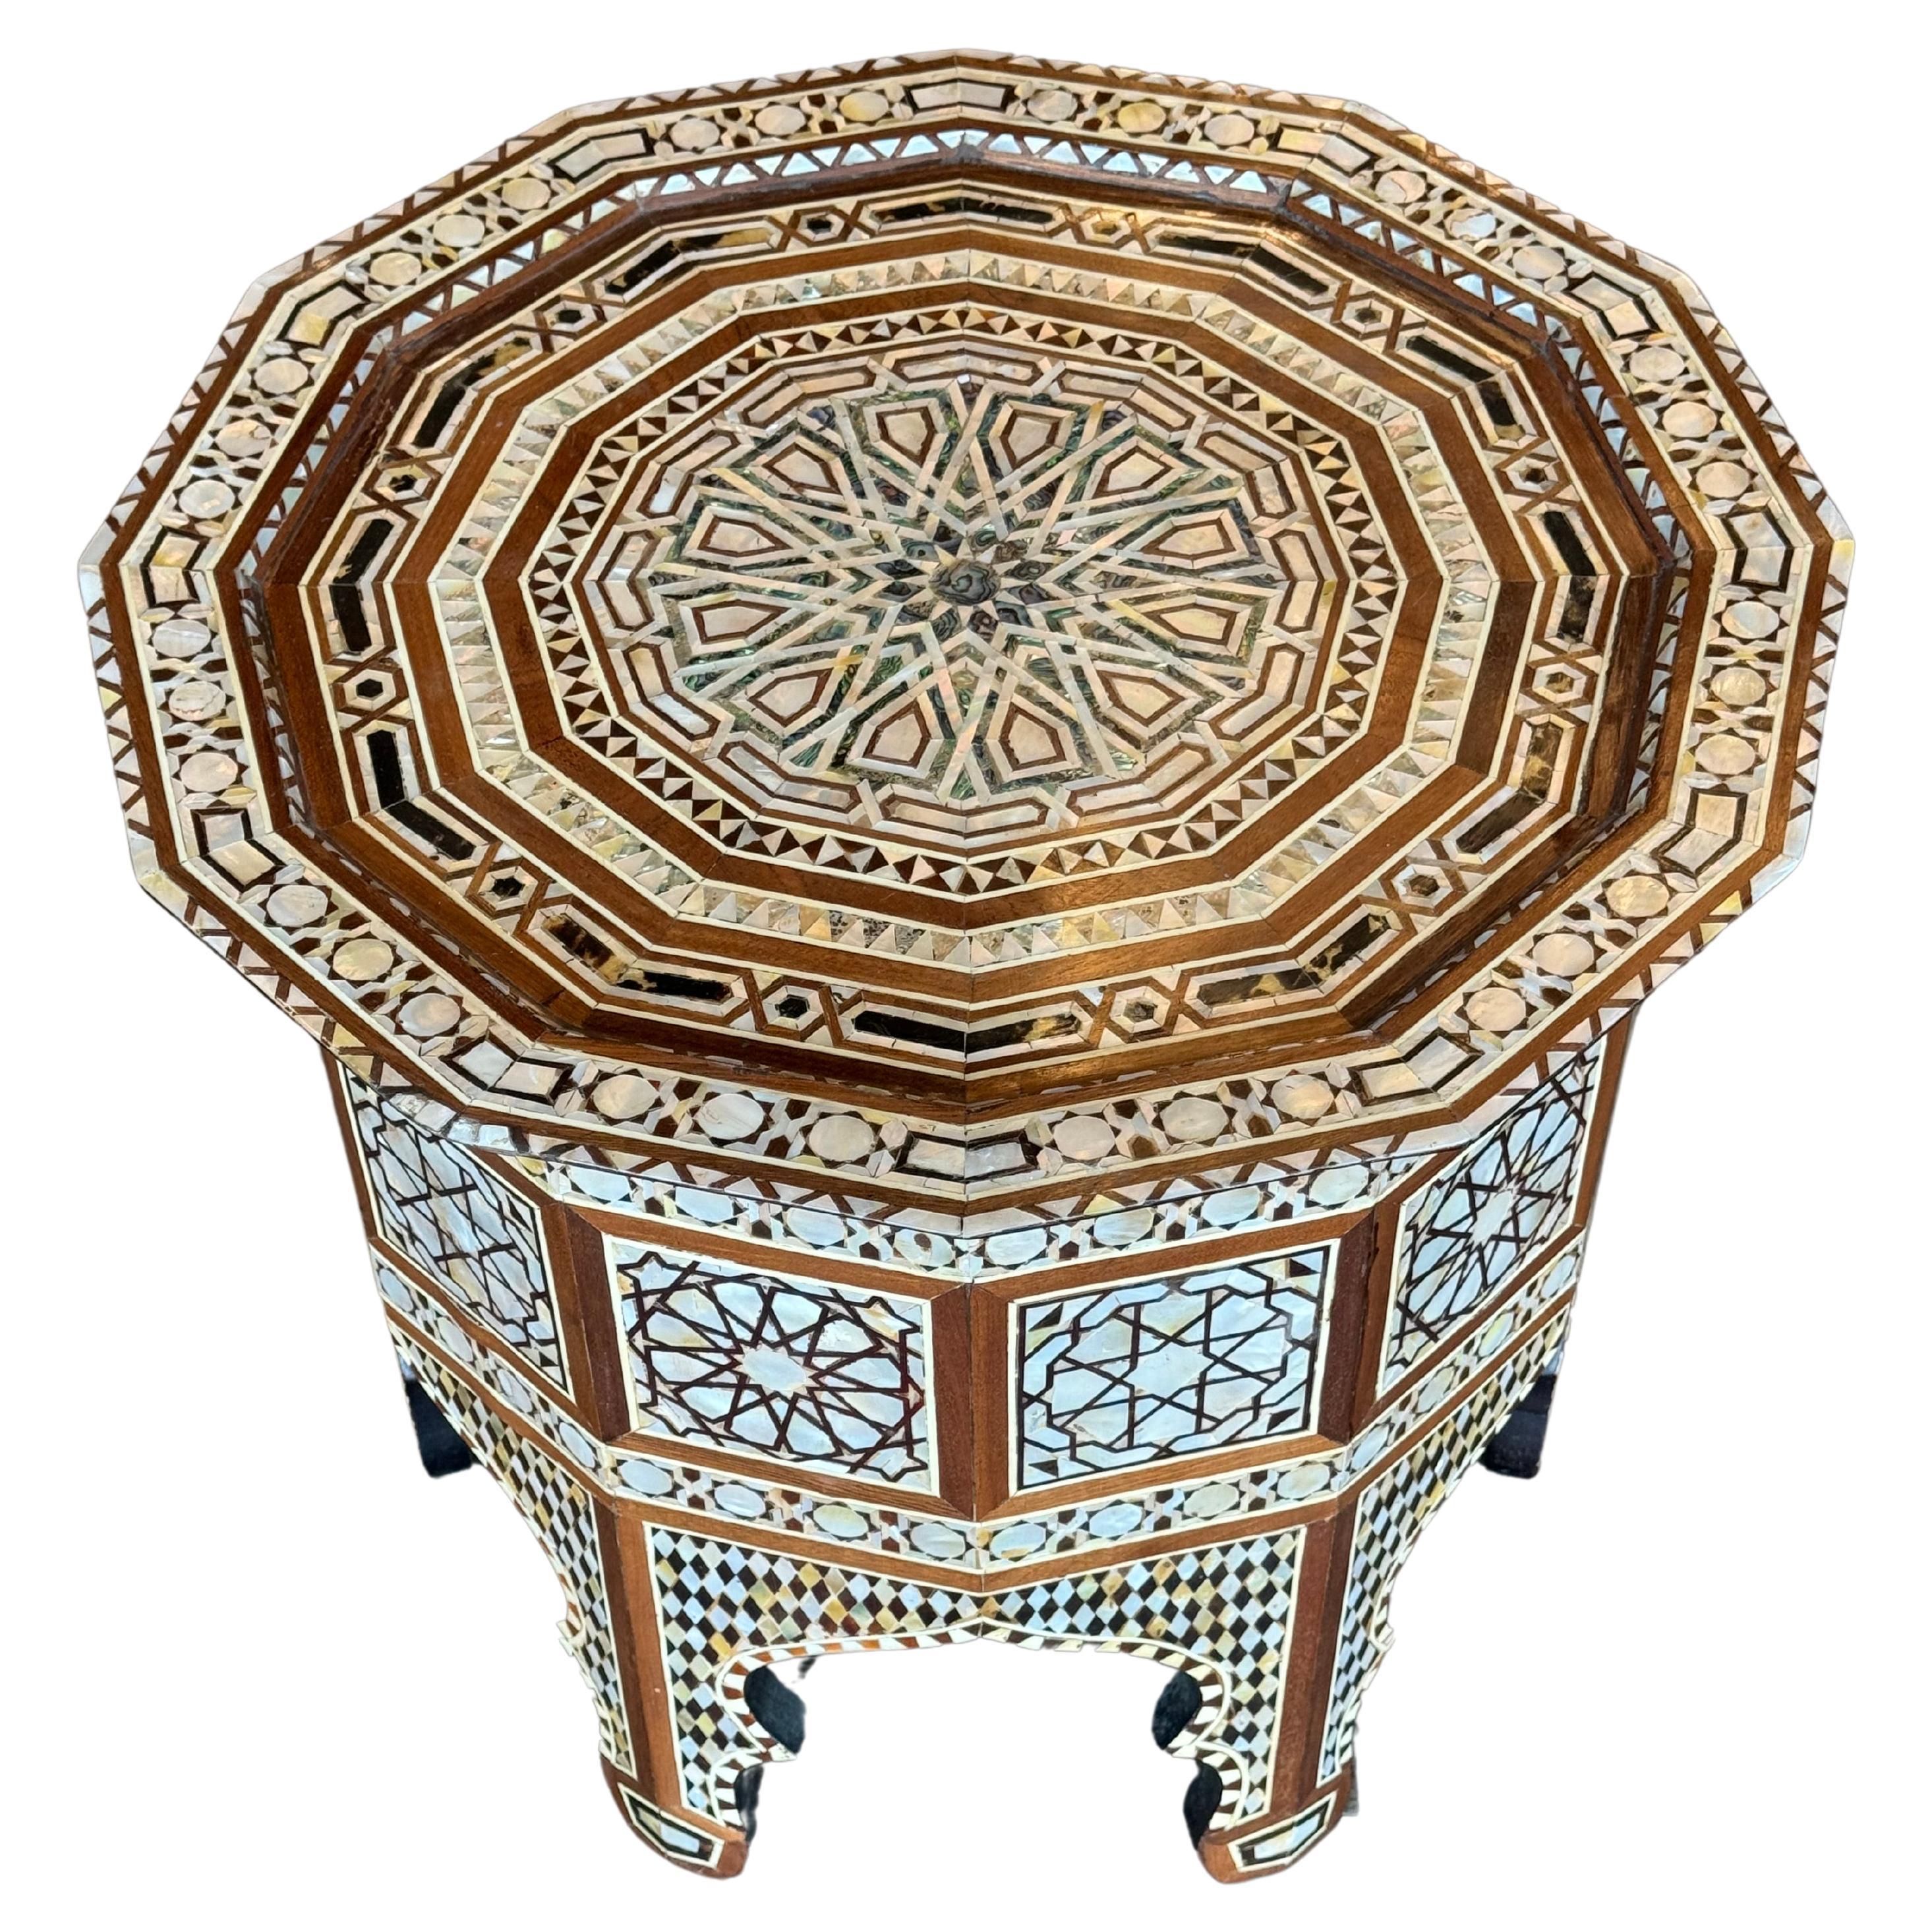 Moorish Hexagonal Coffee Table  
Made with Ivory and Turquoise precious stones
Special, one of a kind antique find sourced by Martyn Lawrence Bullard



